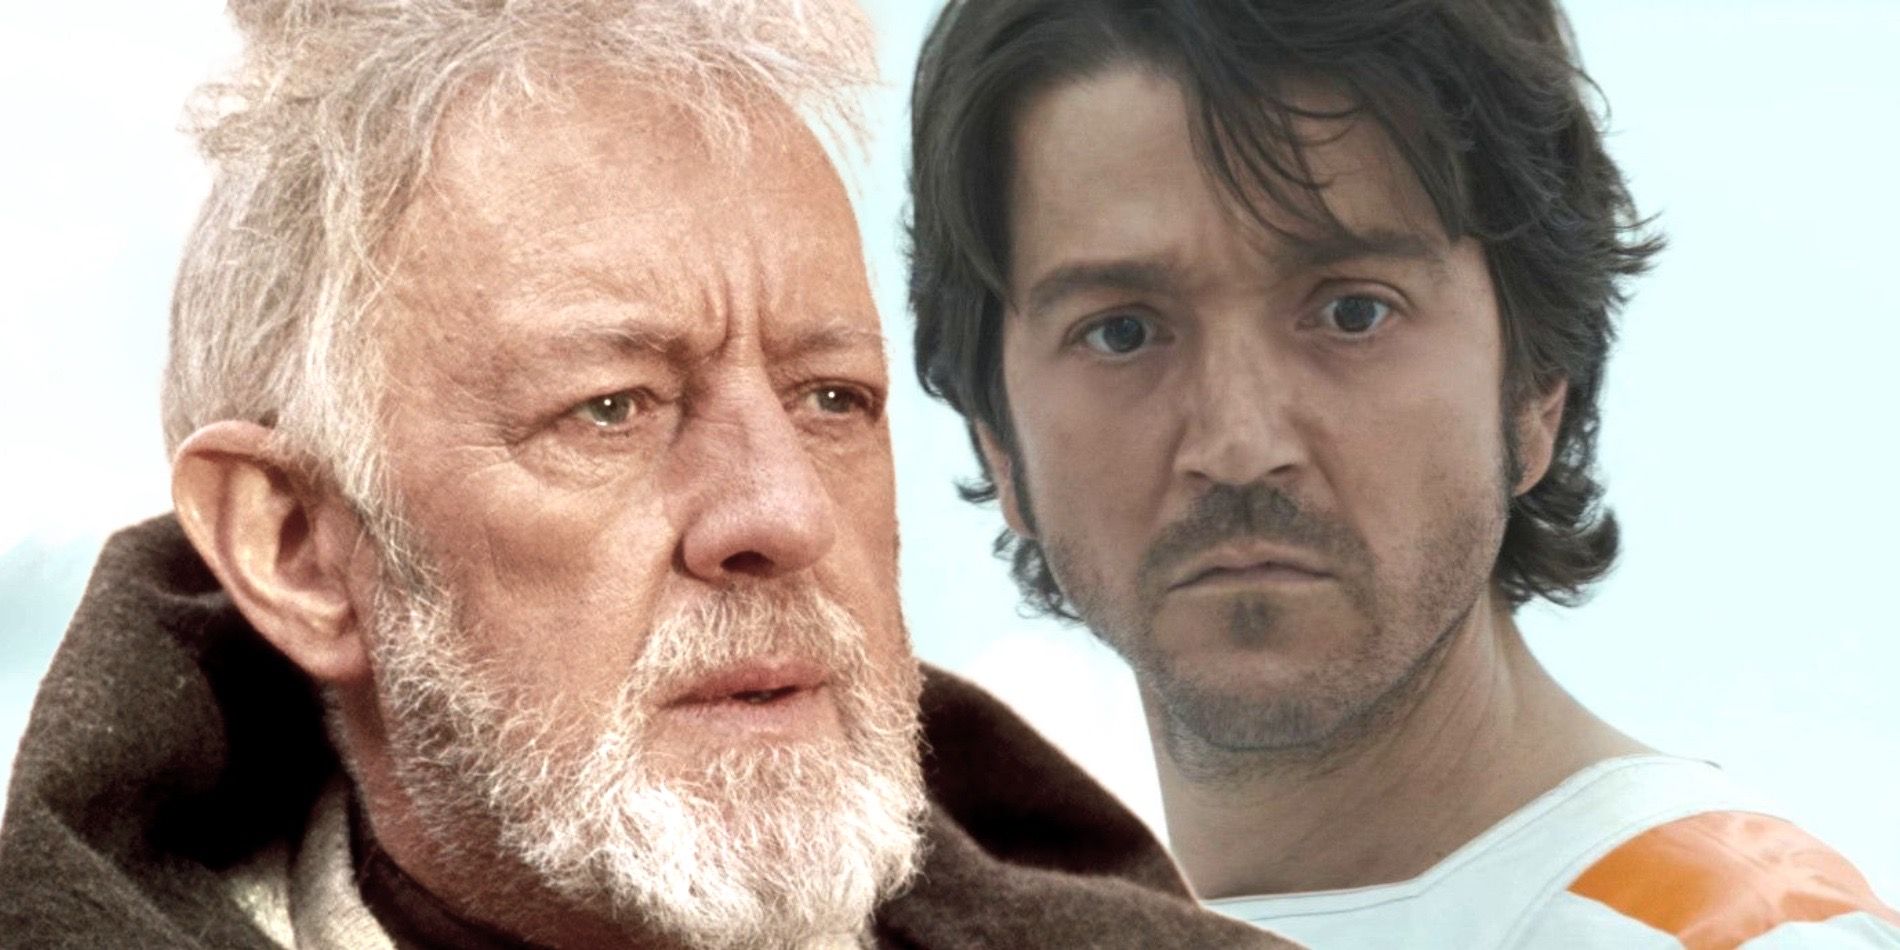 Obi-Wan Kenobi from A New Hope and Cassian Andor from Andor